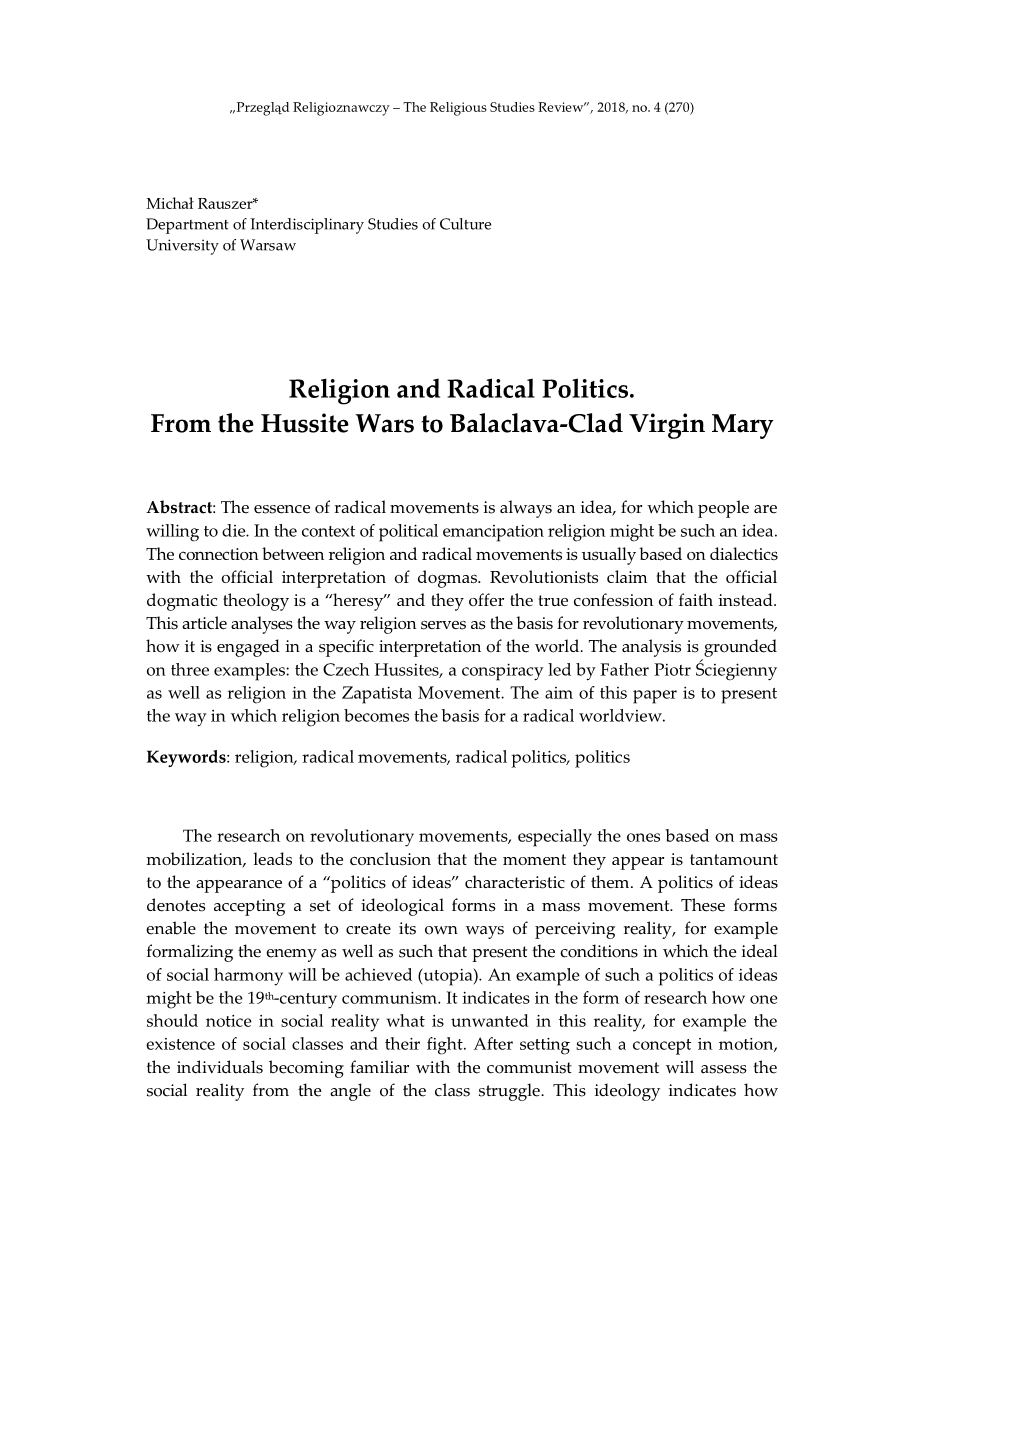 Religion and Radical Politics. from the Hussite Wars to Balaclava-Clad Virgin Mary